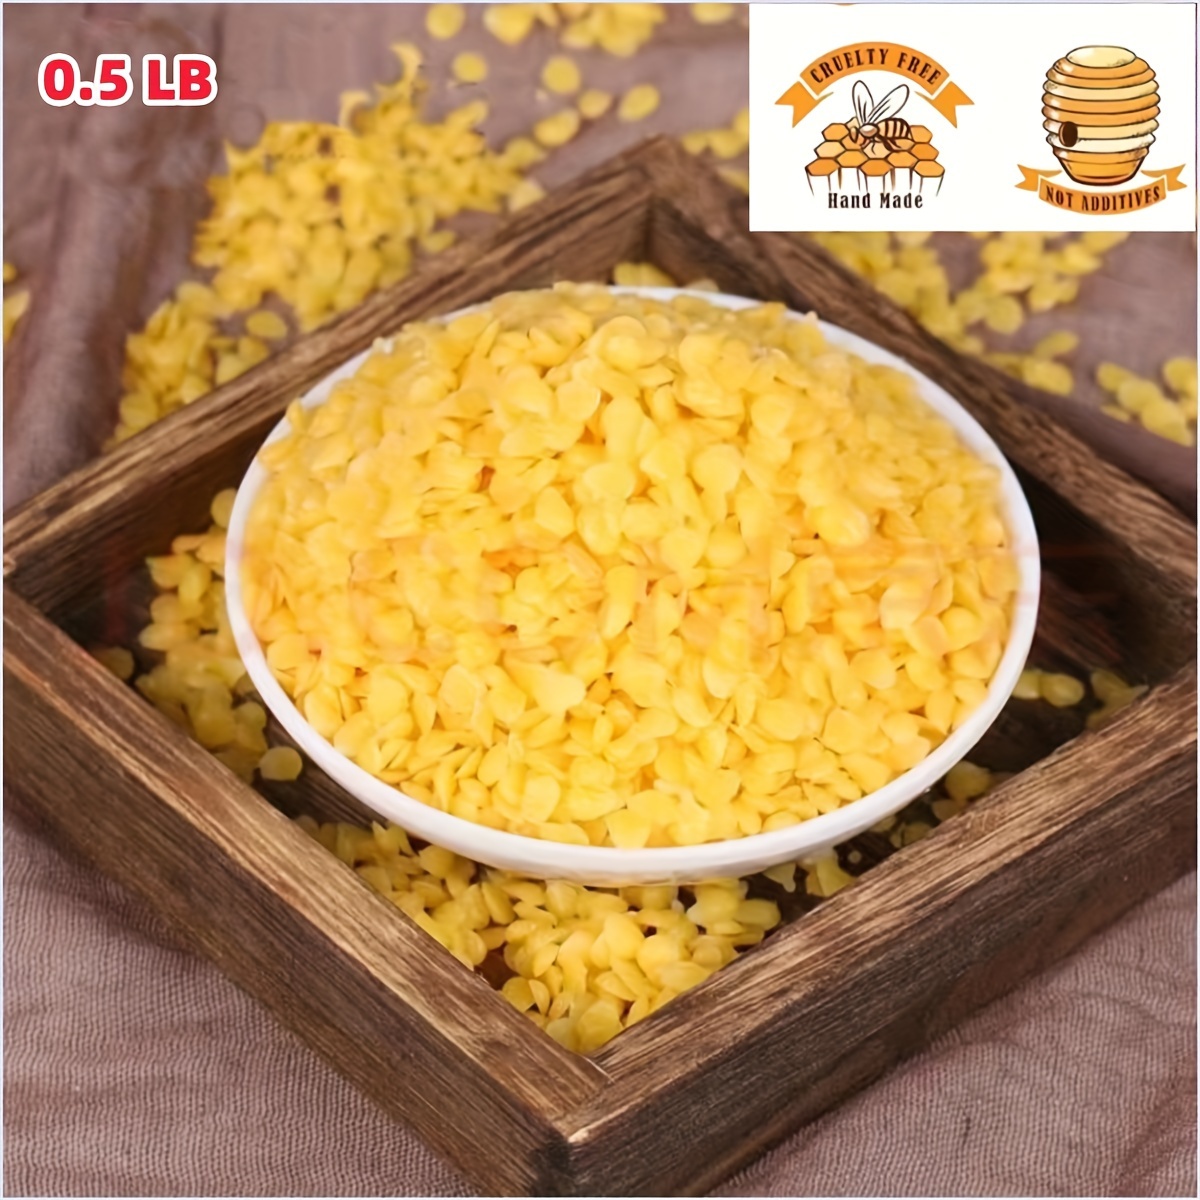 453g Yellow Beeswax Pellets, 100% Natural, For Skin, Face, Body, And Hair  Care, Diy Cream, Lotion, Lip Balm, Candle, And Soap Making